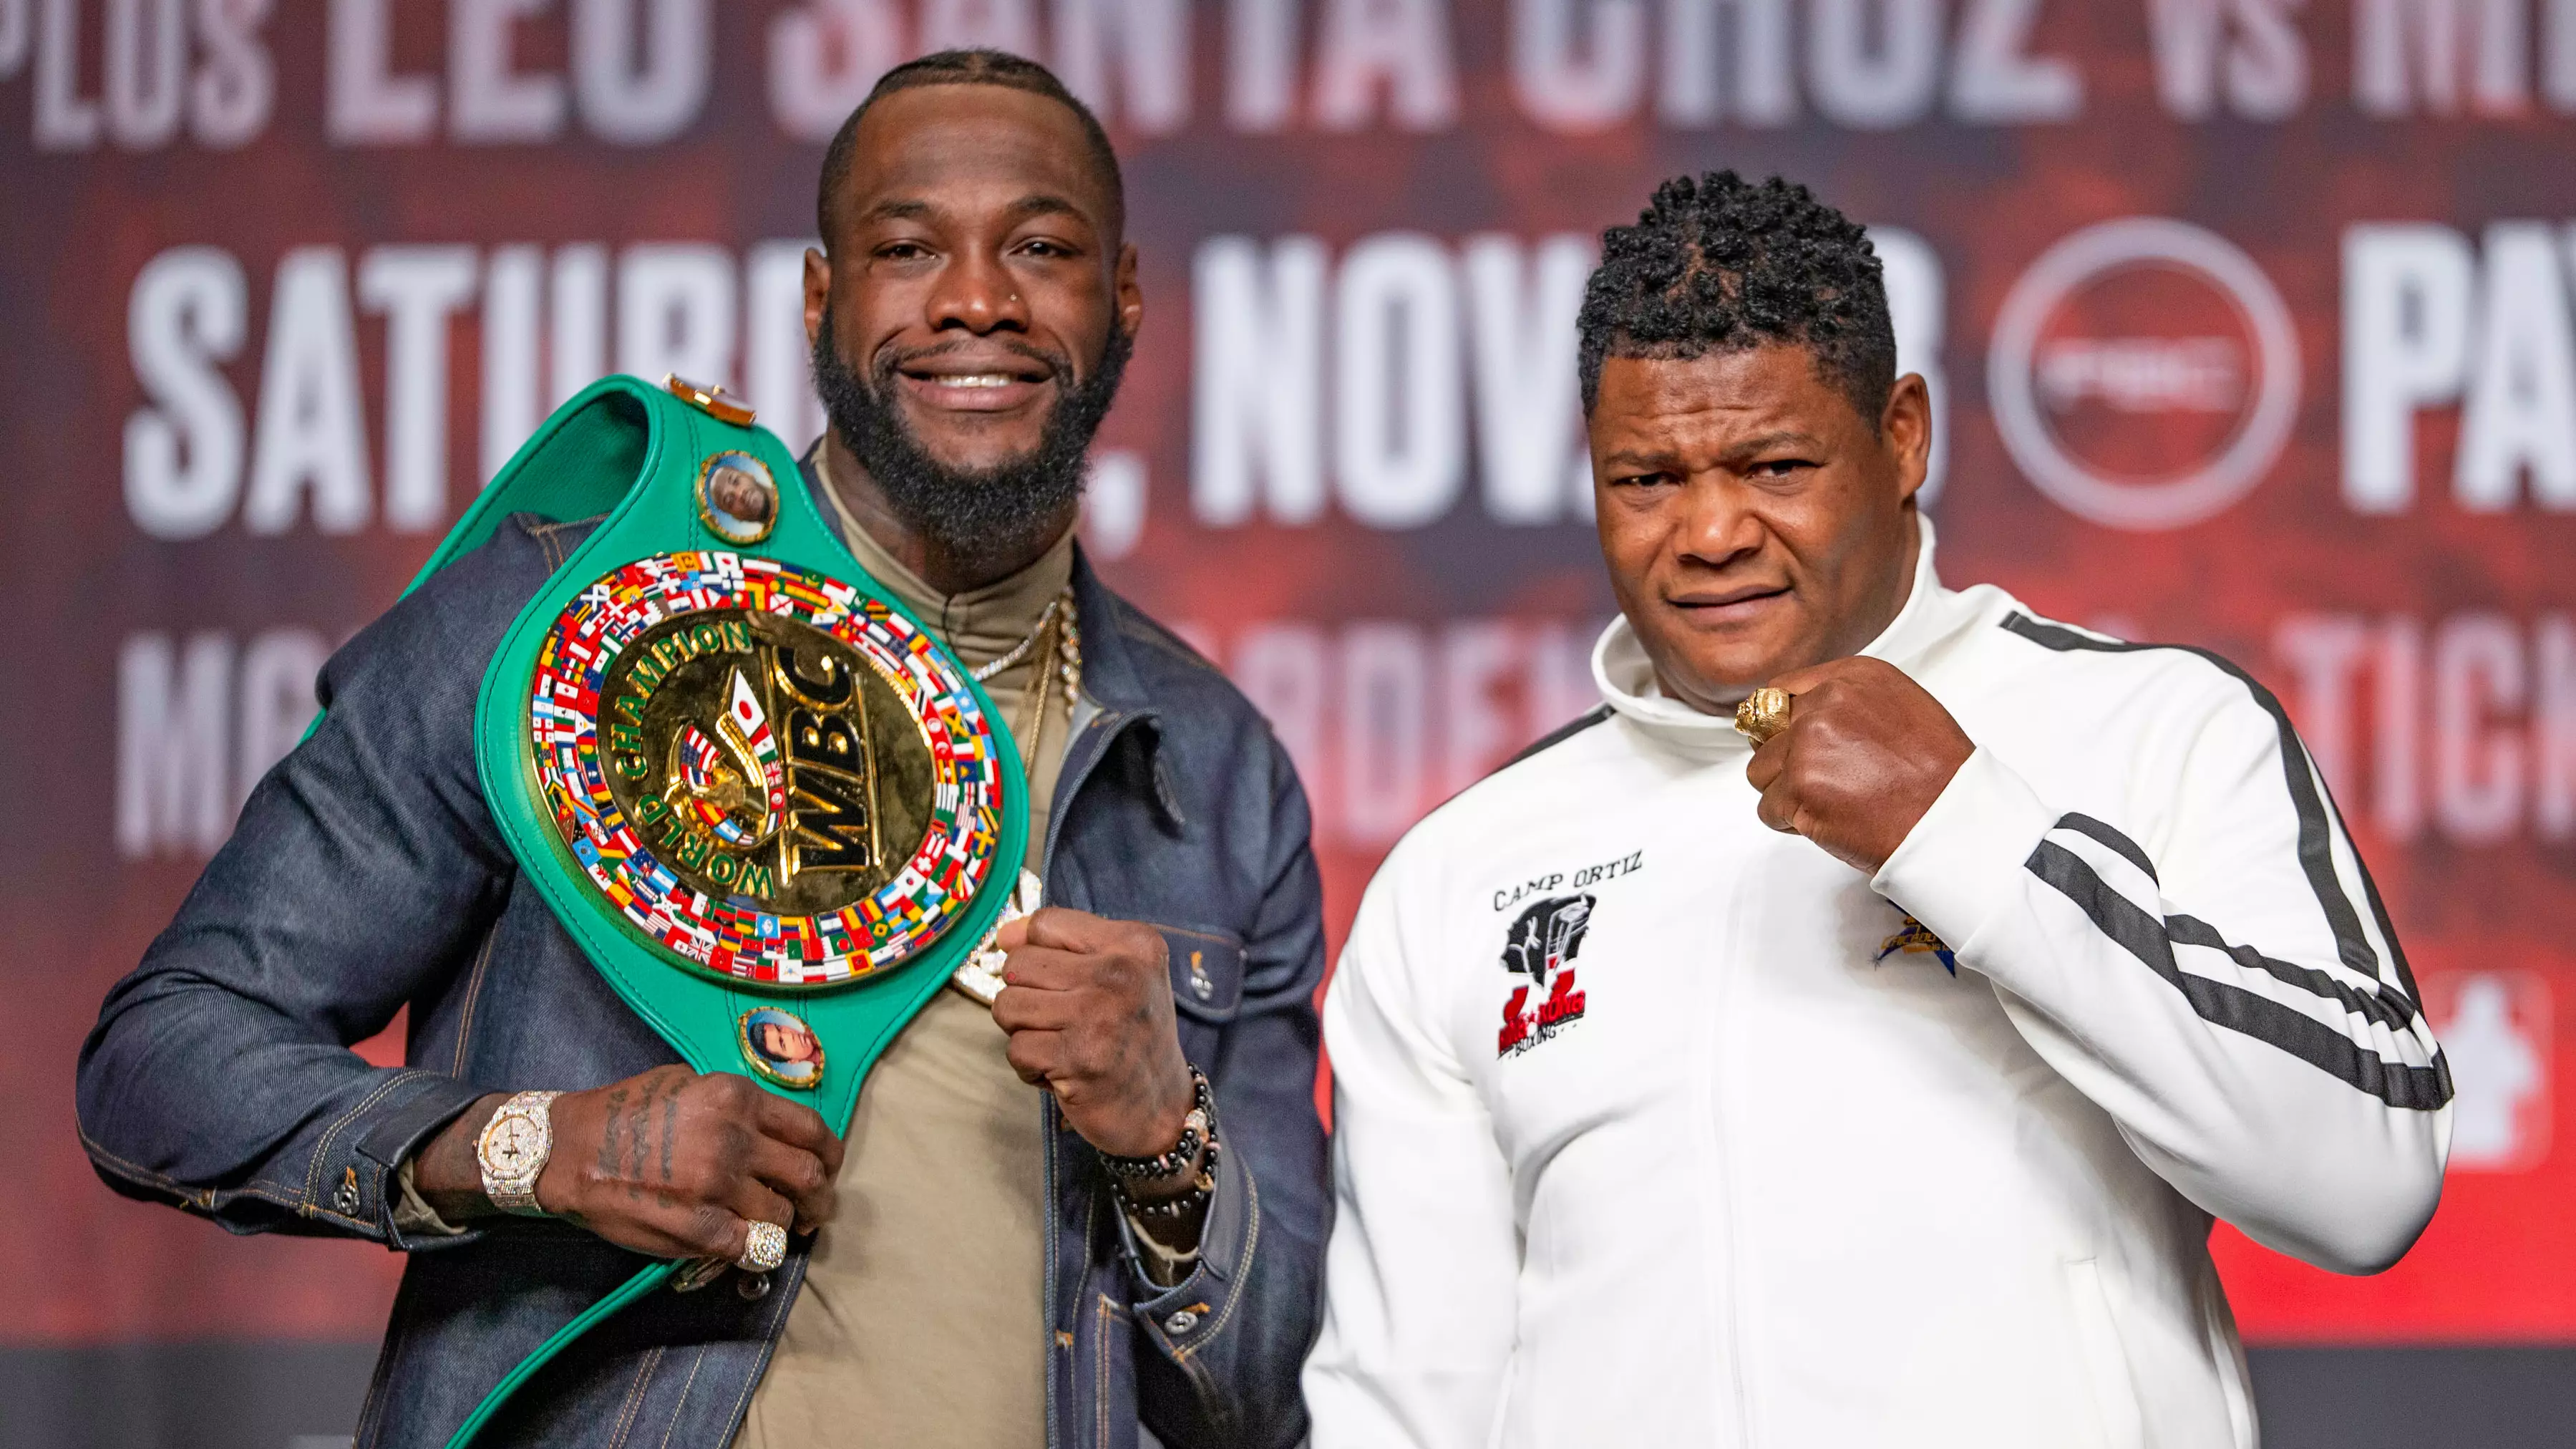 Deontay Wilder vs Luis Ortiz: LIVE Stream And TV Channel Info For Heavyweight Clash